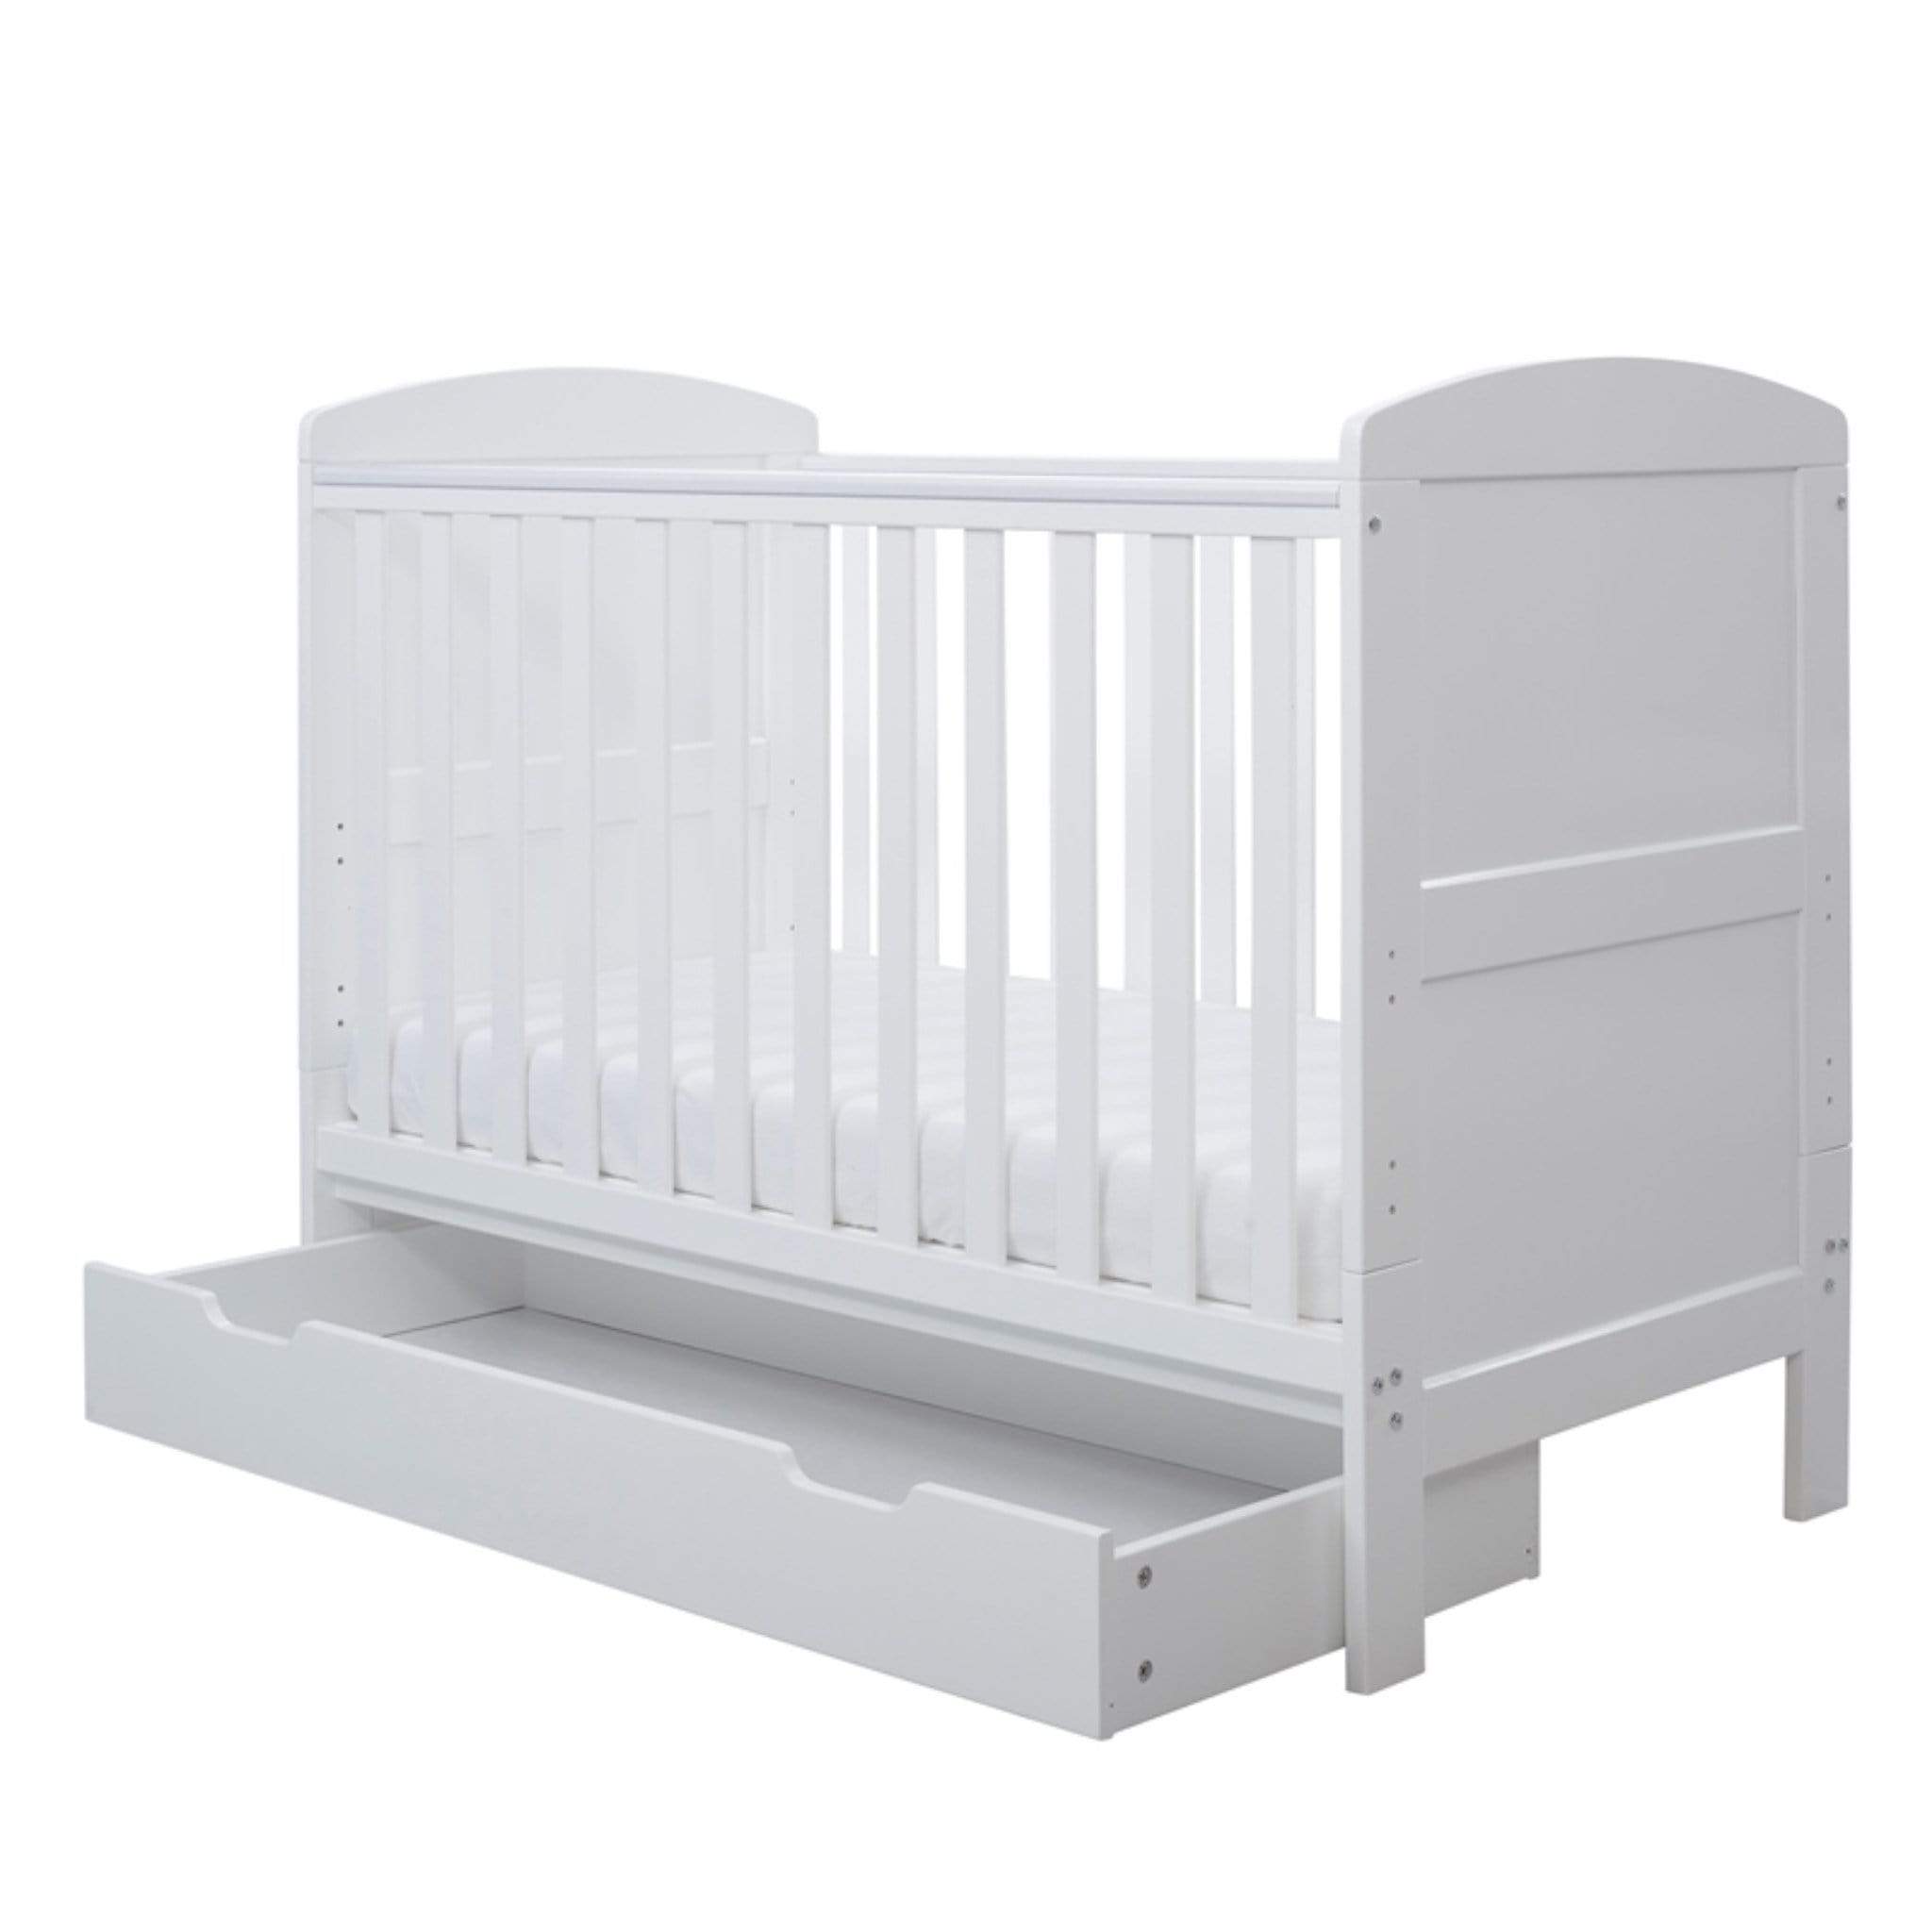 Ickle Bubba baby cot beds Ickle Bubba Coleby Mini 2 Piece Furniture & Under Drawer White